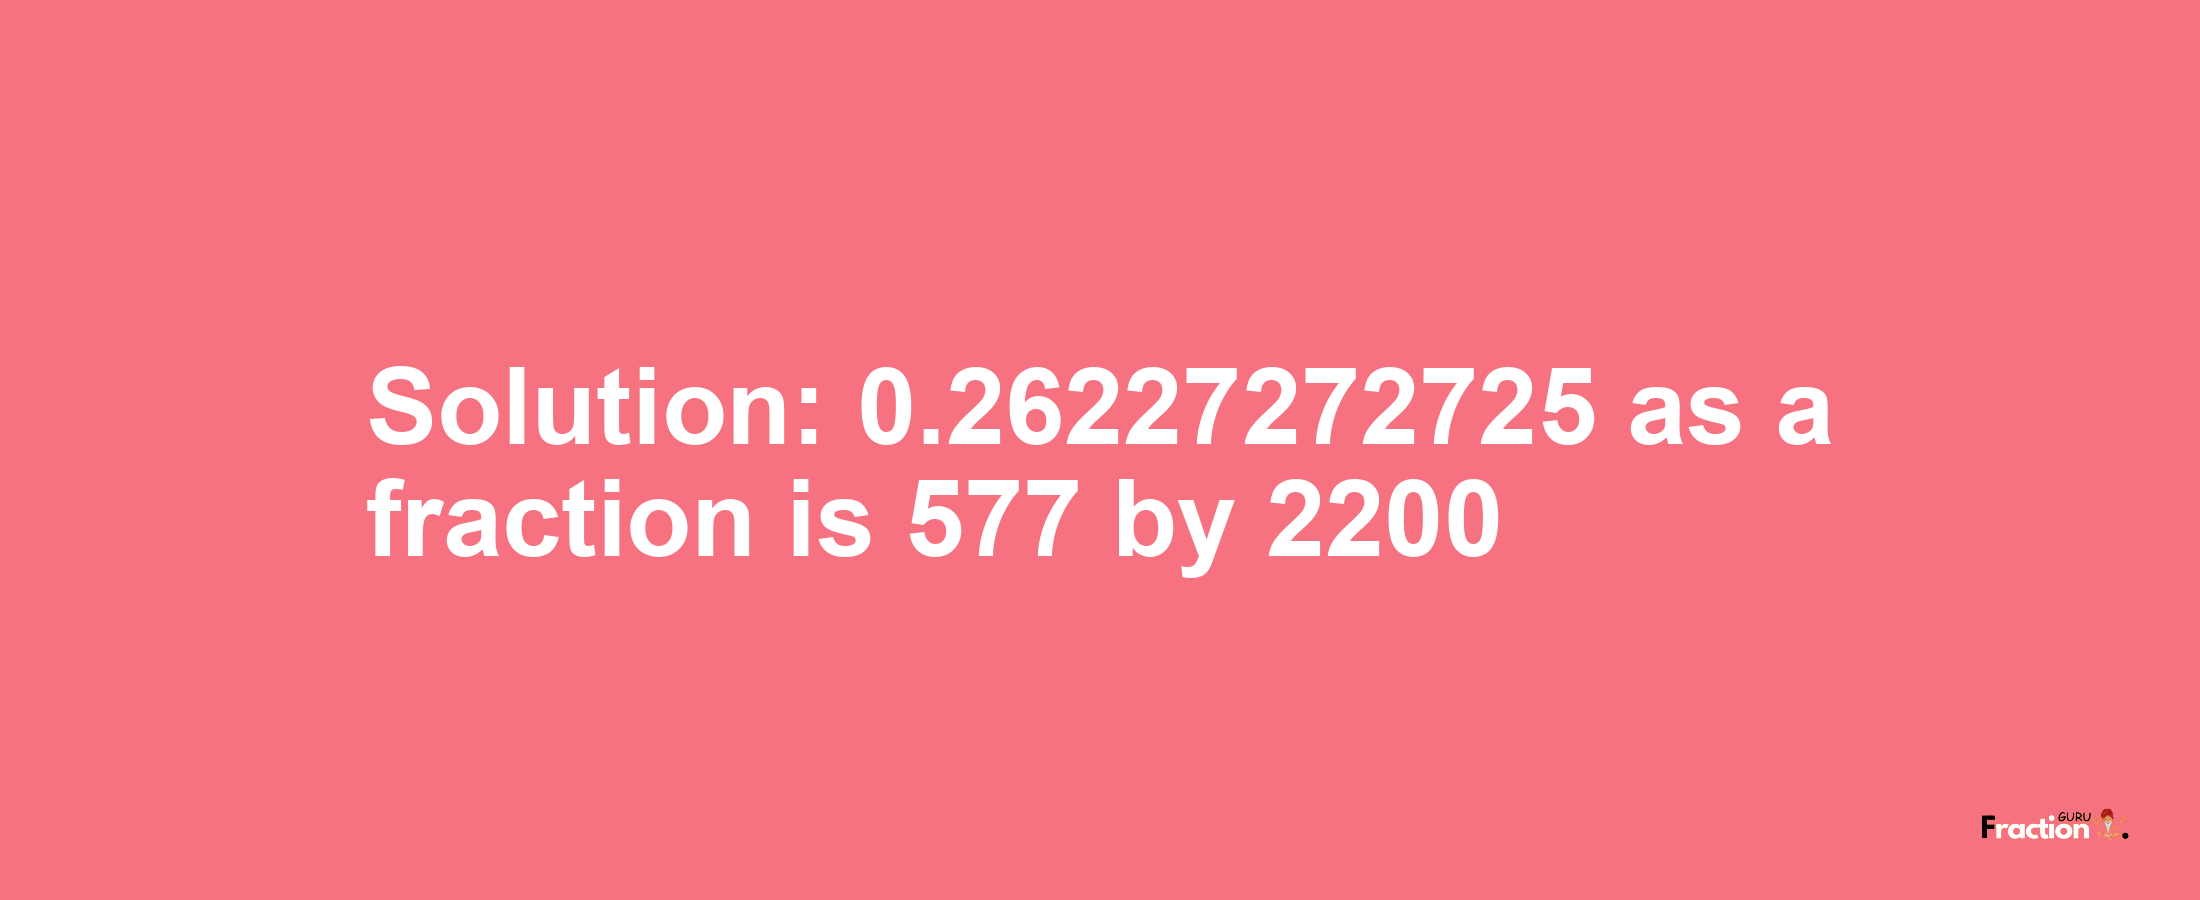 Solution:0.26227272725 as a fraction is 577/2200